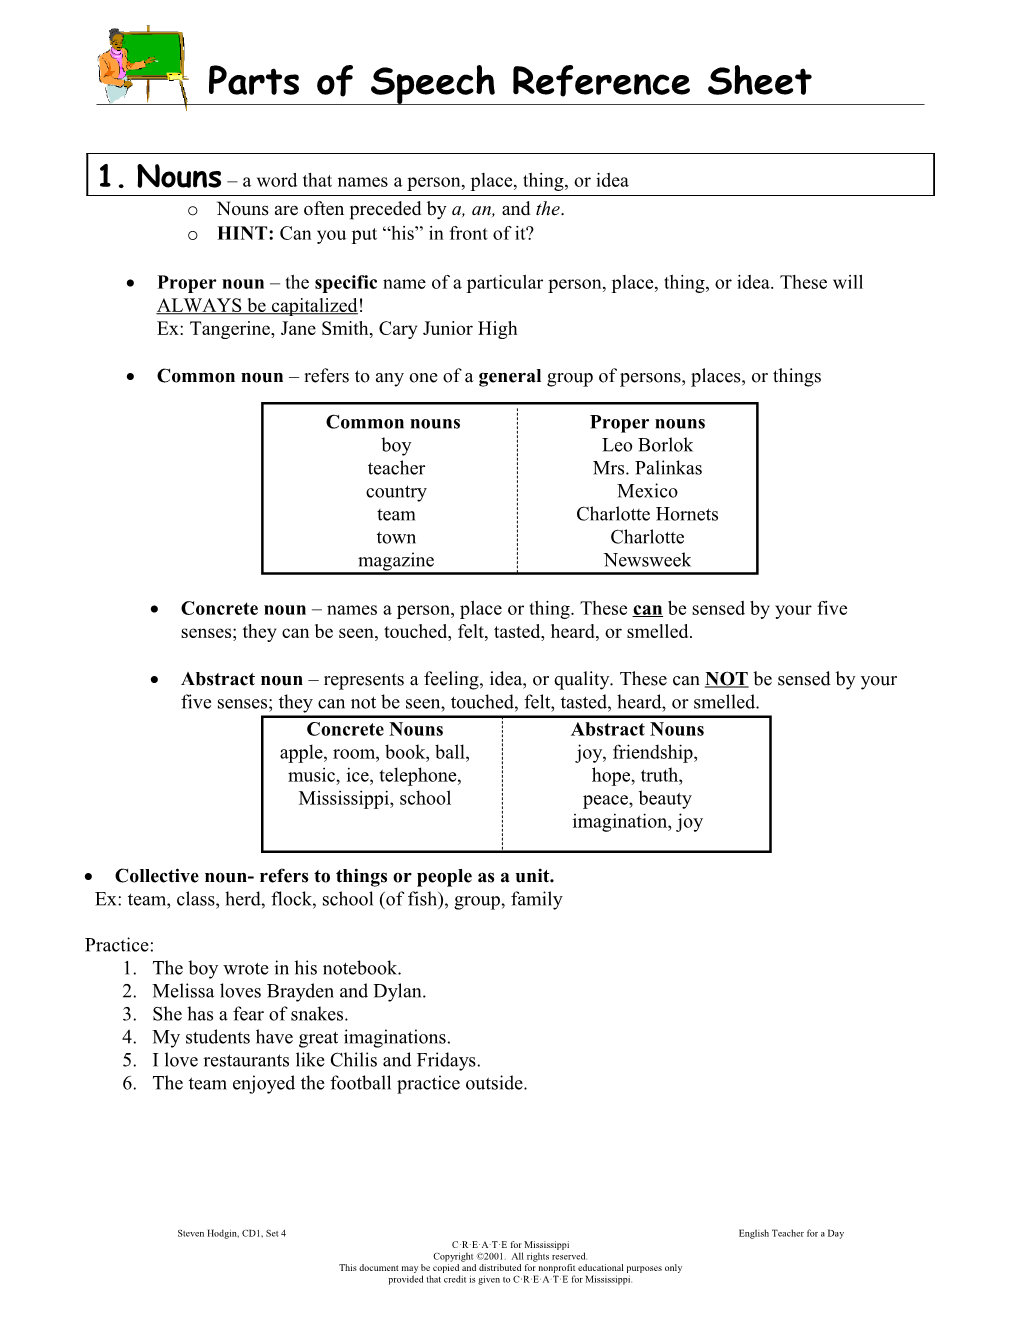 Parts of Speech Reference Sheet